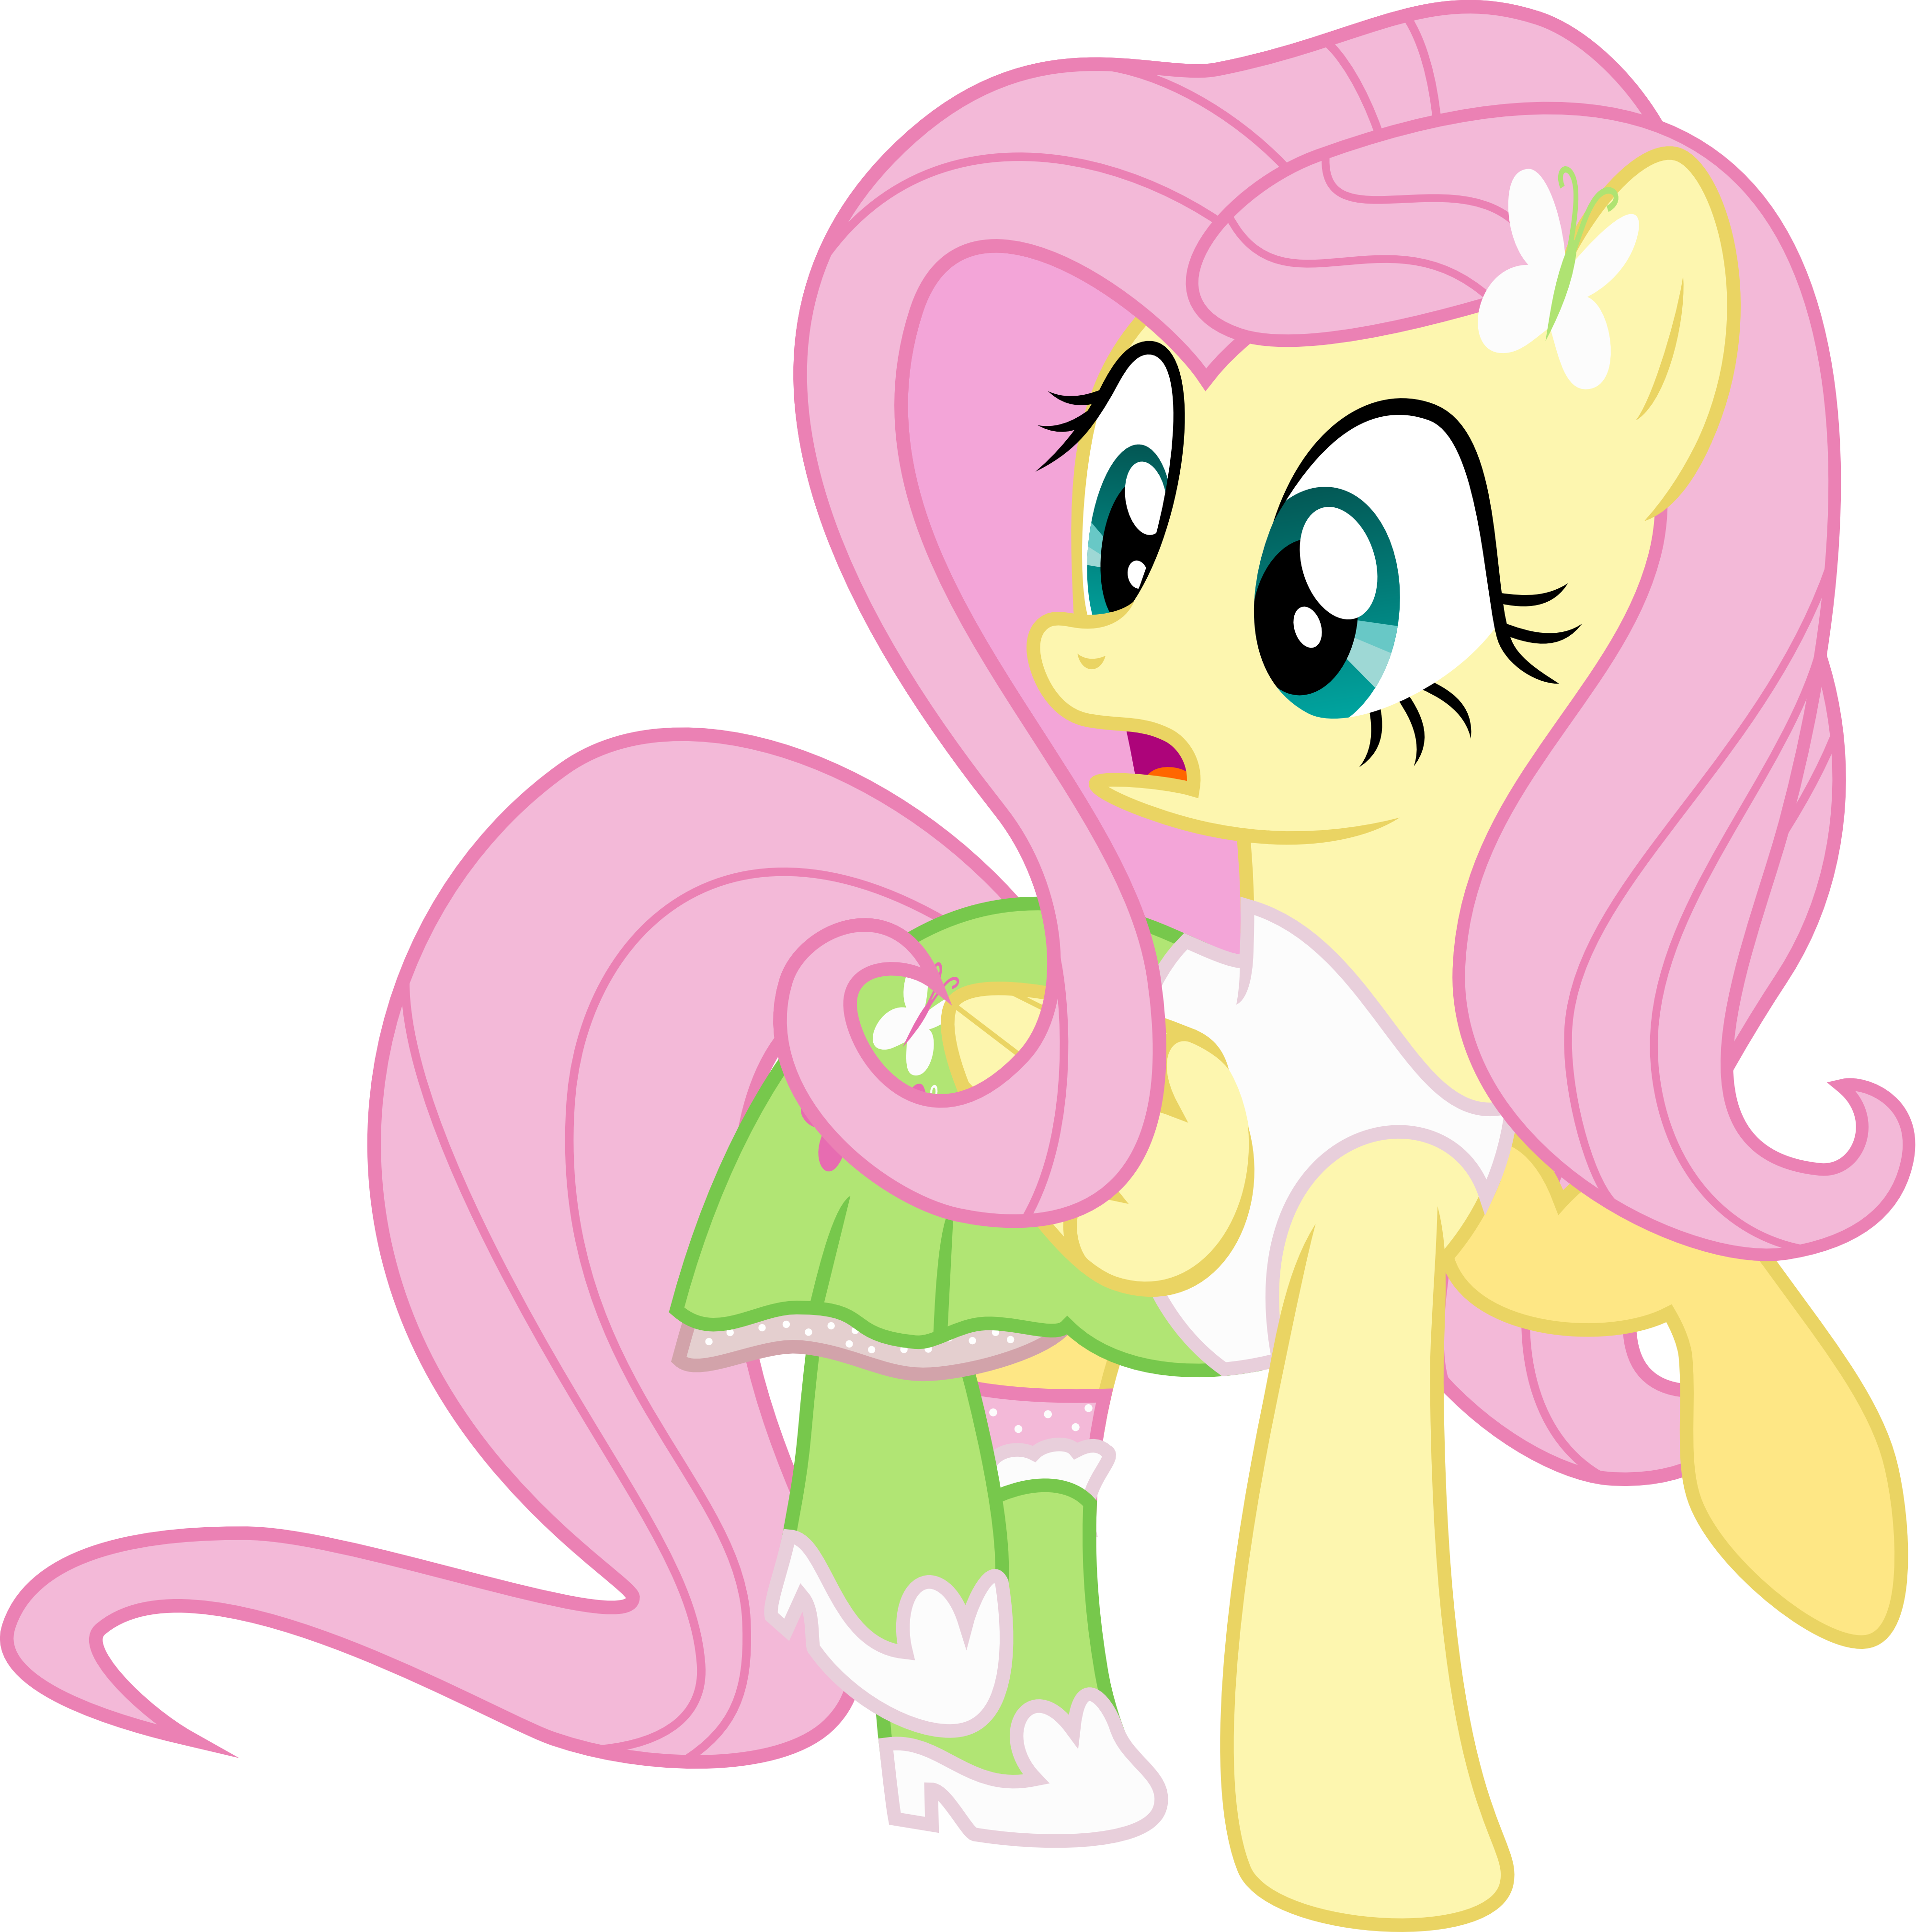 Fluttershy Equestria Girls Outfit By Jeatz-axl - Equestria Girls 2 Fluttershy (4000x4033)